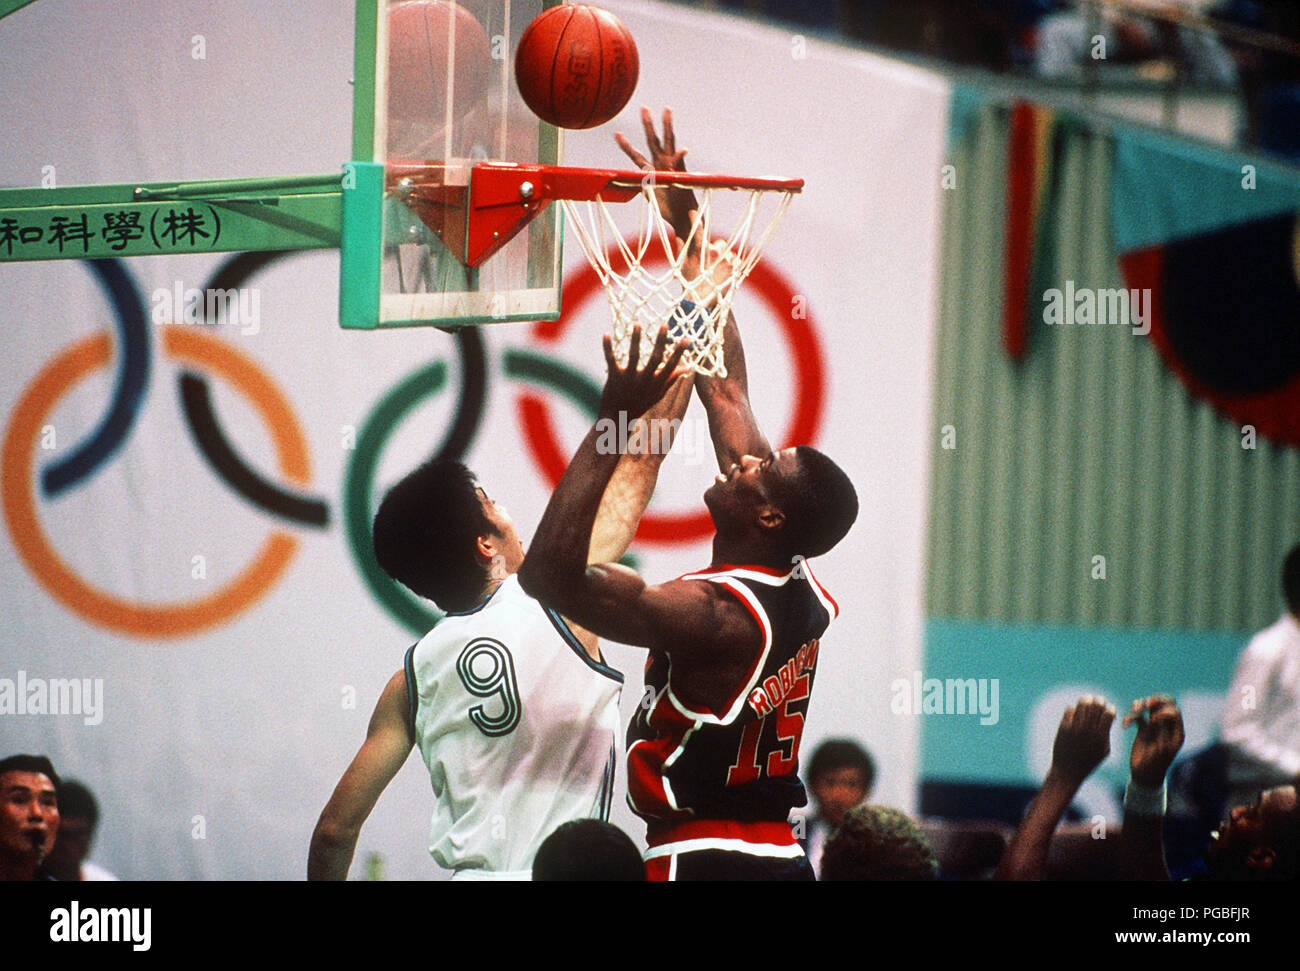 Ensign David Robinson of the U.S. Olympic men's basketball team goes up for a shot during a preliminary round game against the team from China during the XXIV Olympic Games. Stock Photo